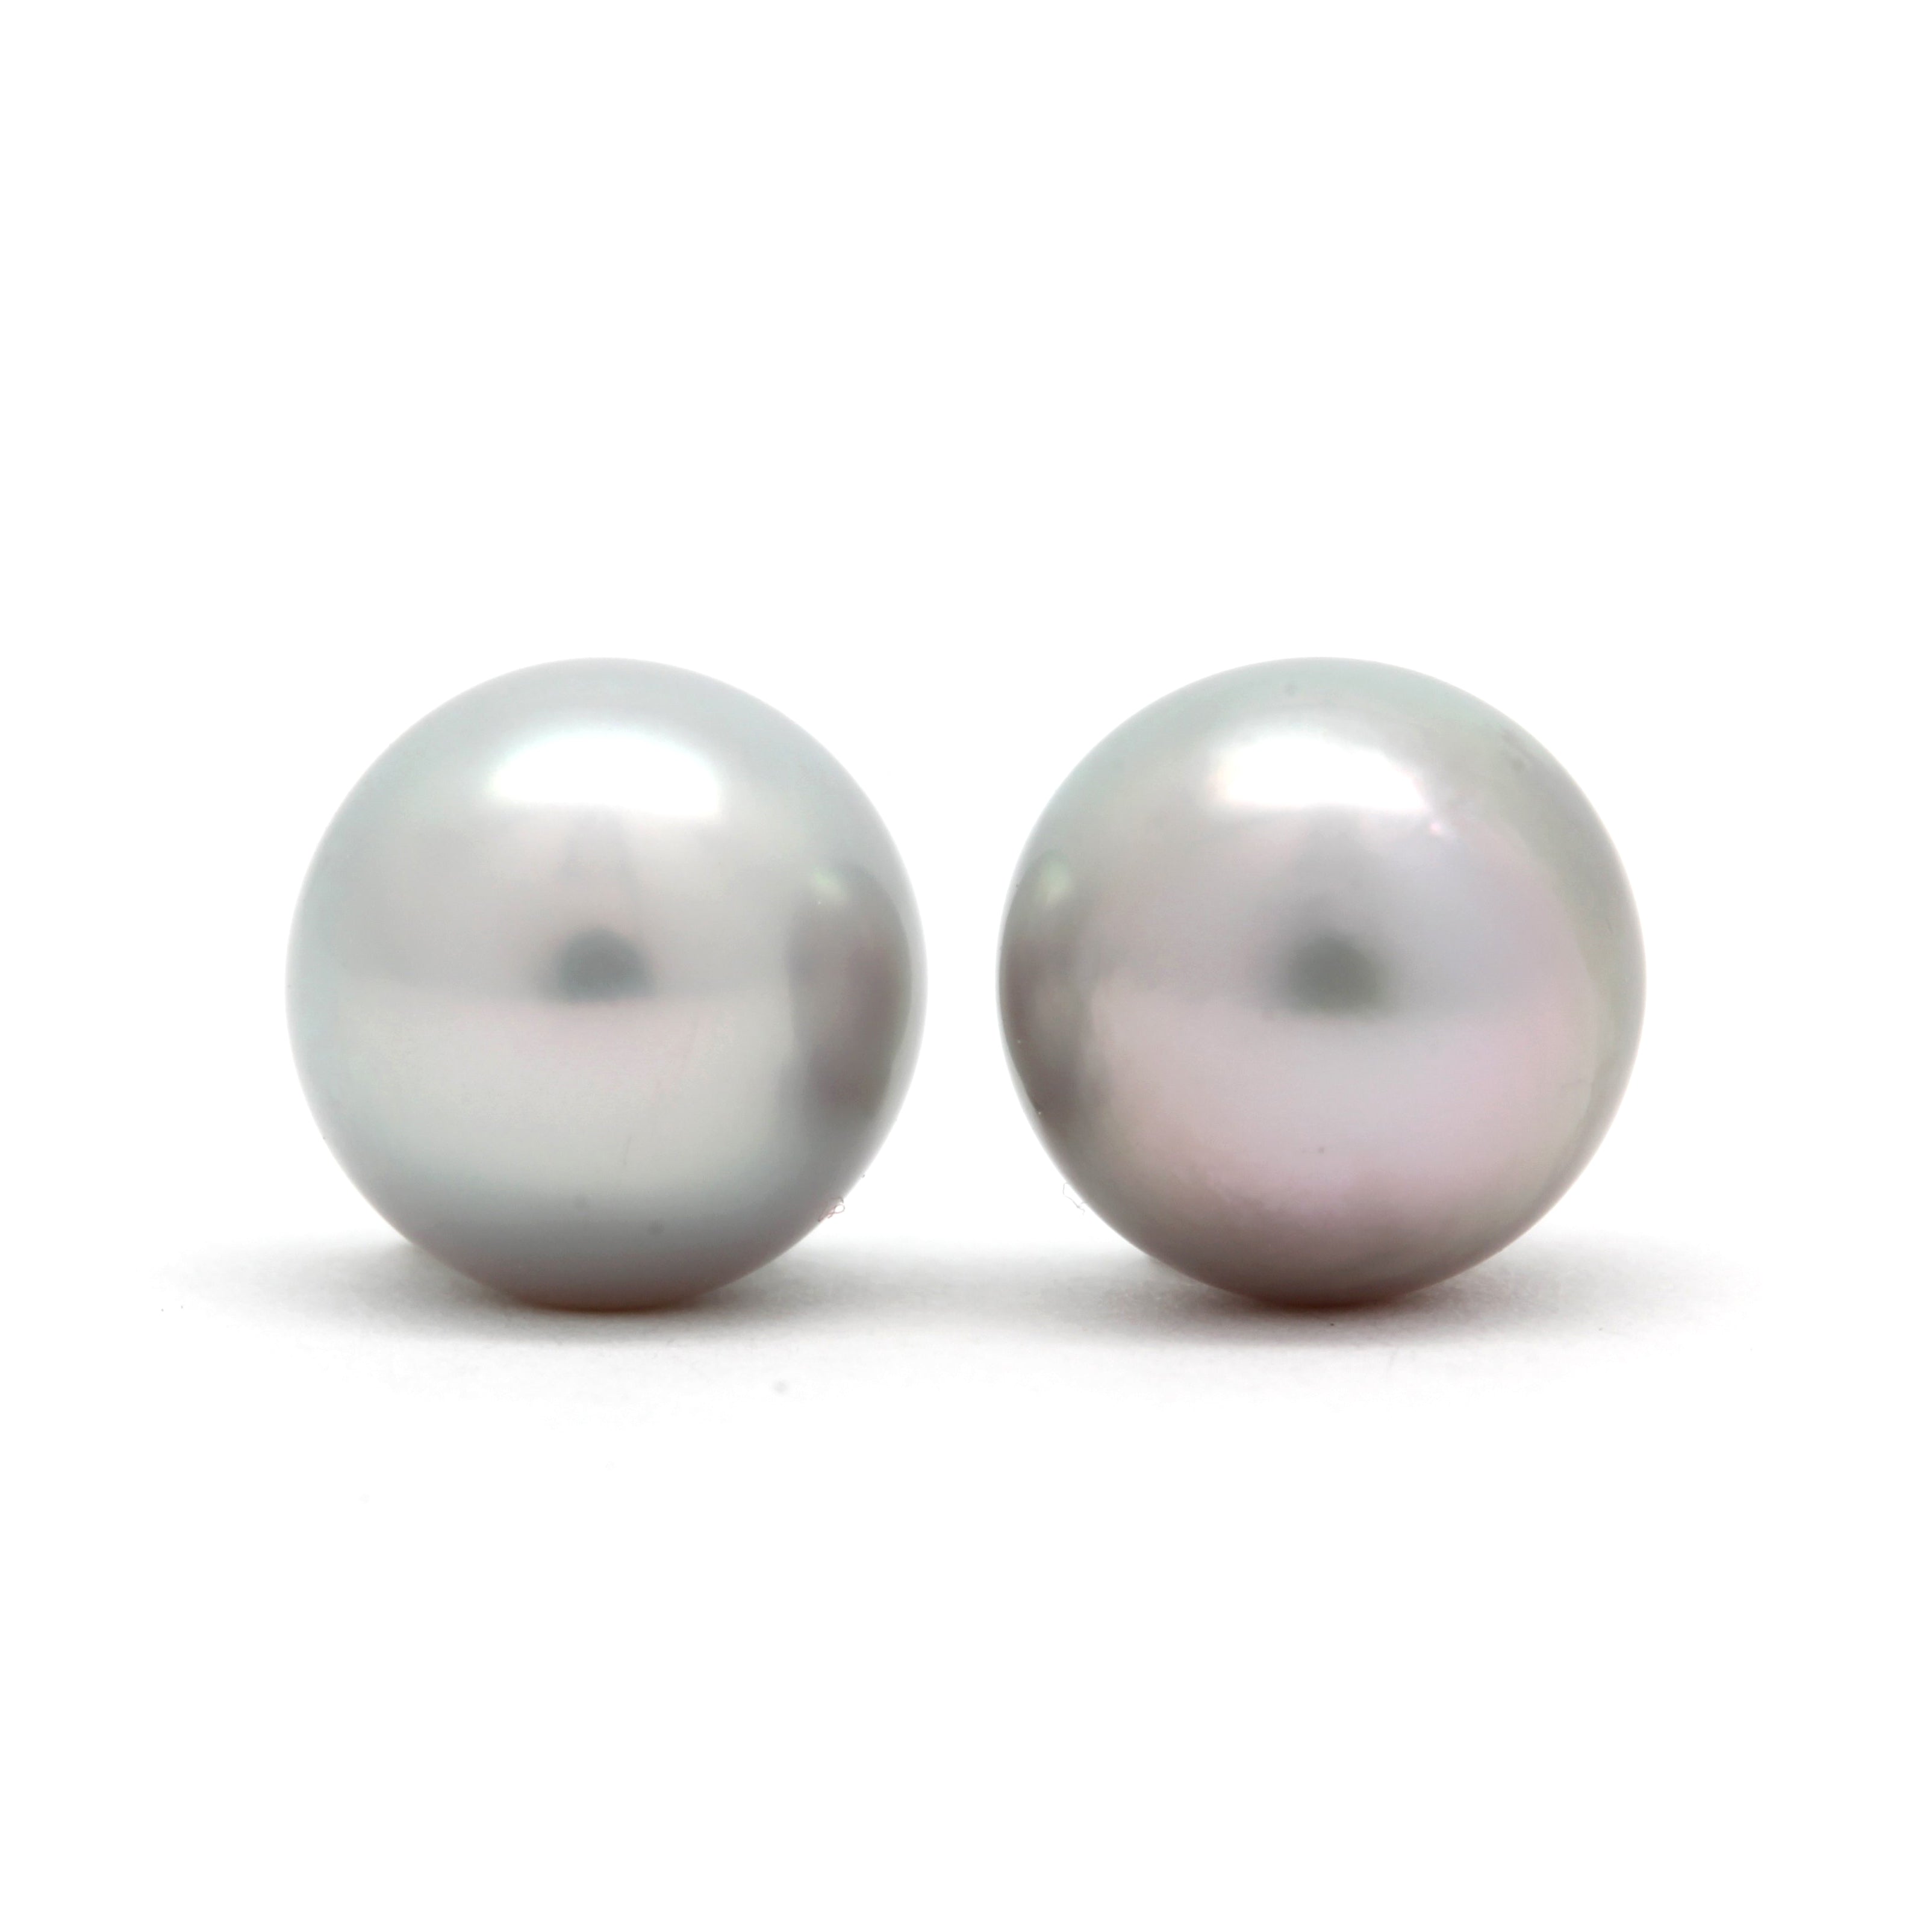 Pair of 8.5 mm Cortez Pearls